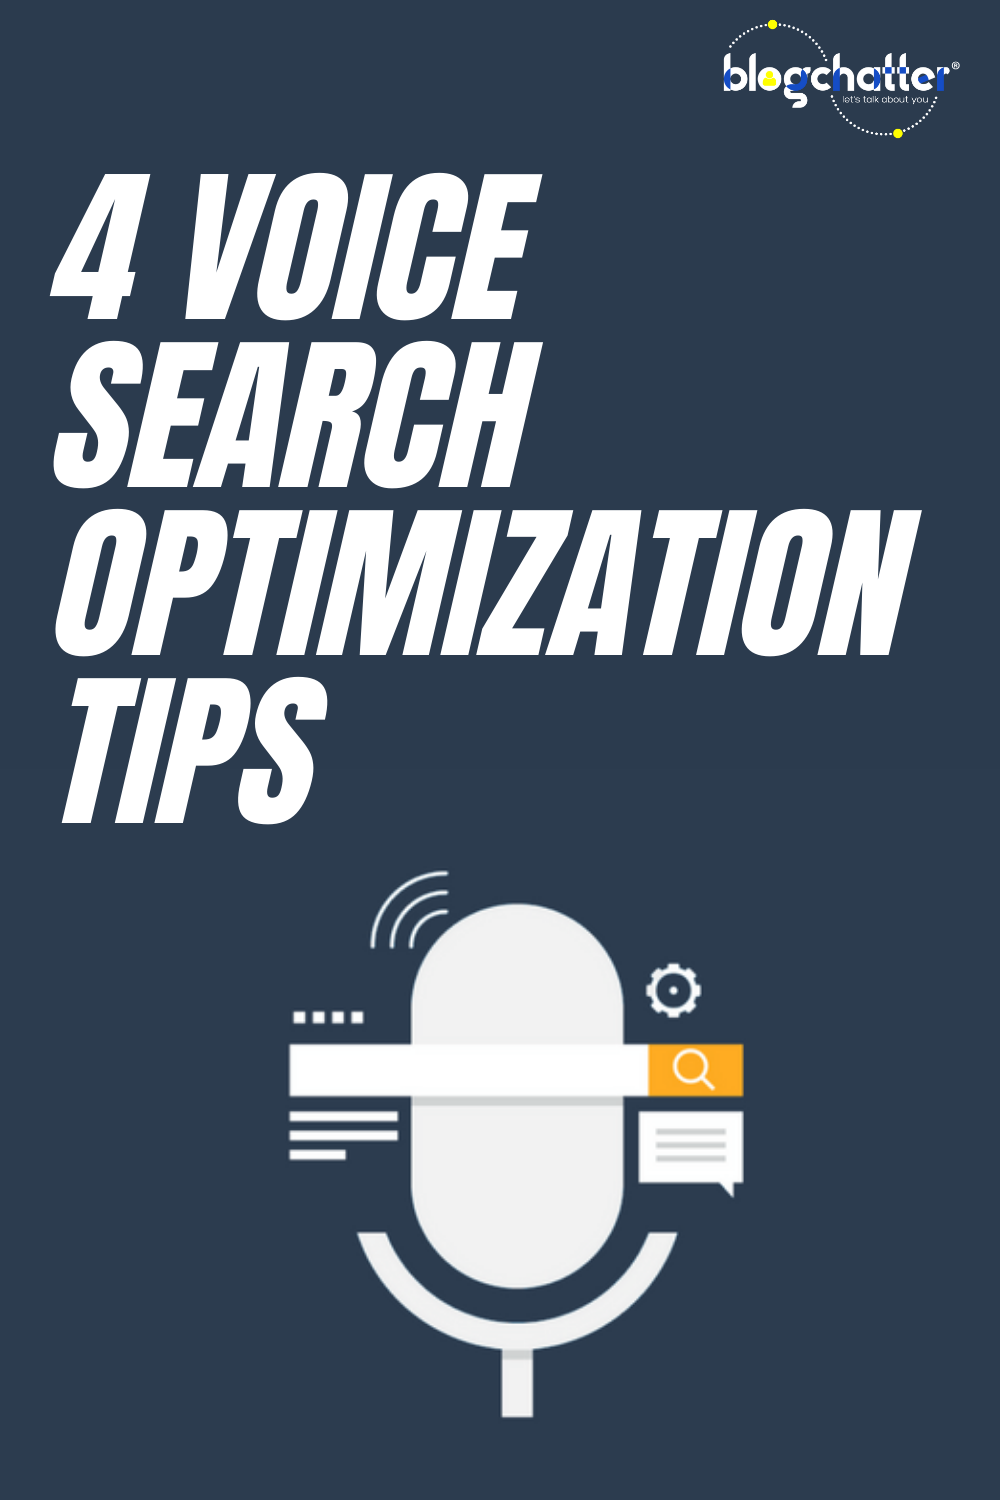 Voice search optimization tips